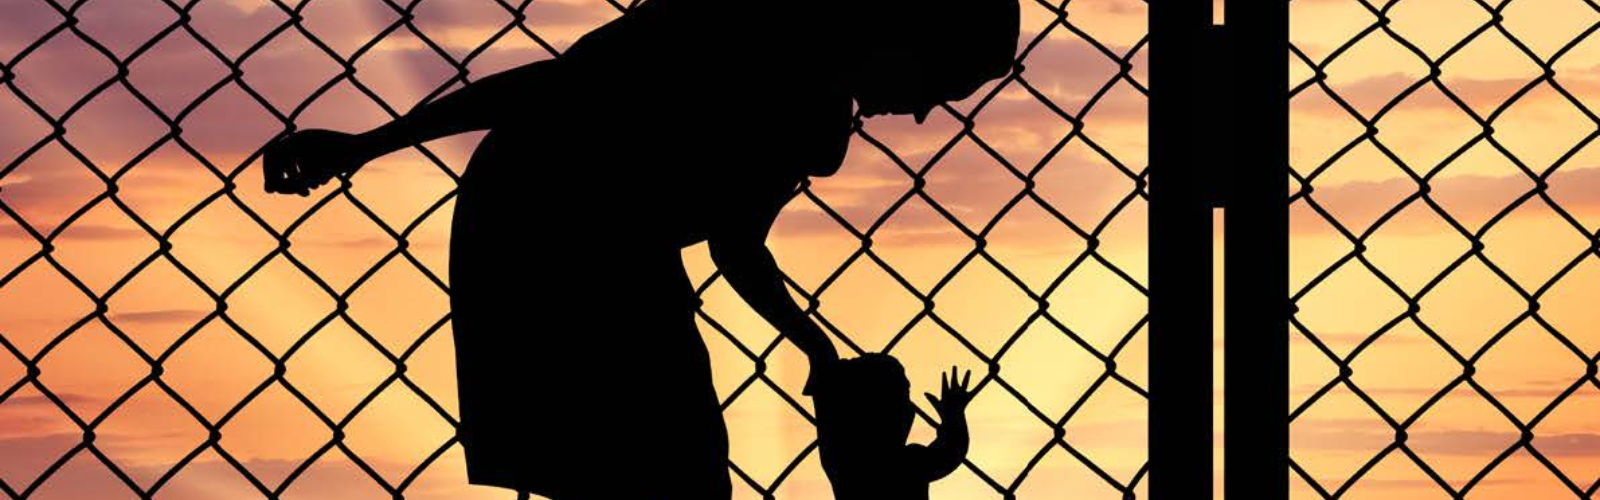 Image of black figure of woman bending over and holding hand of small child against barbed wire fence and sunset.